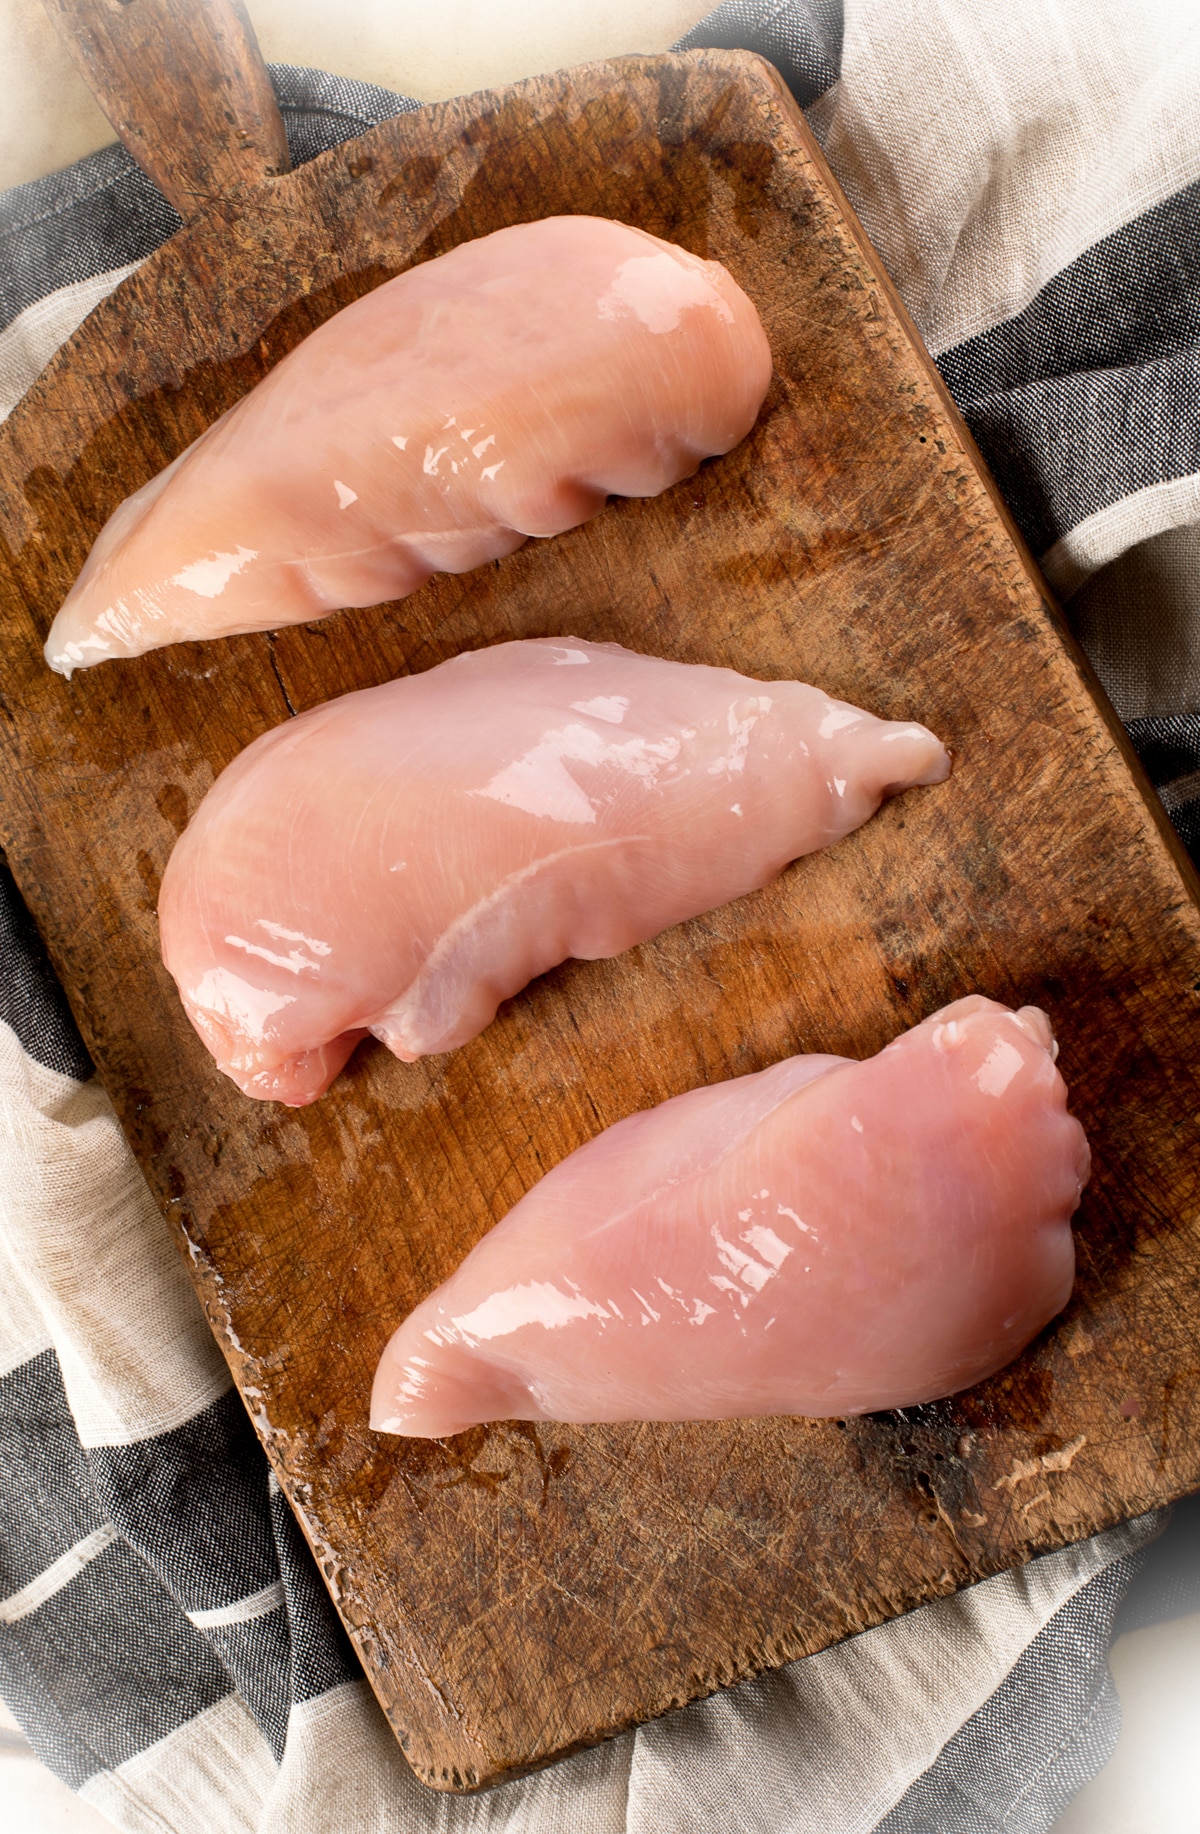 Three raw chicken breasts on a wooden cutting board on top of a black and white napkin.